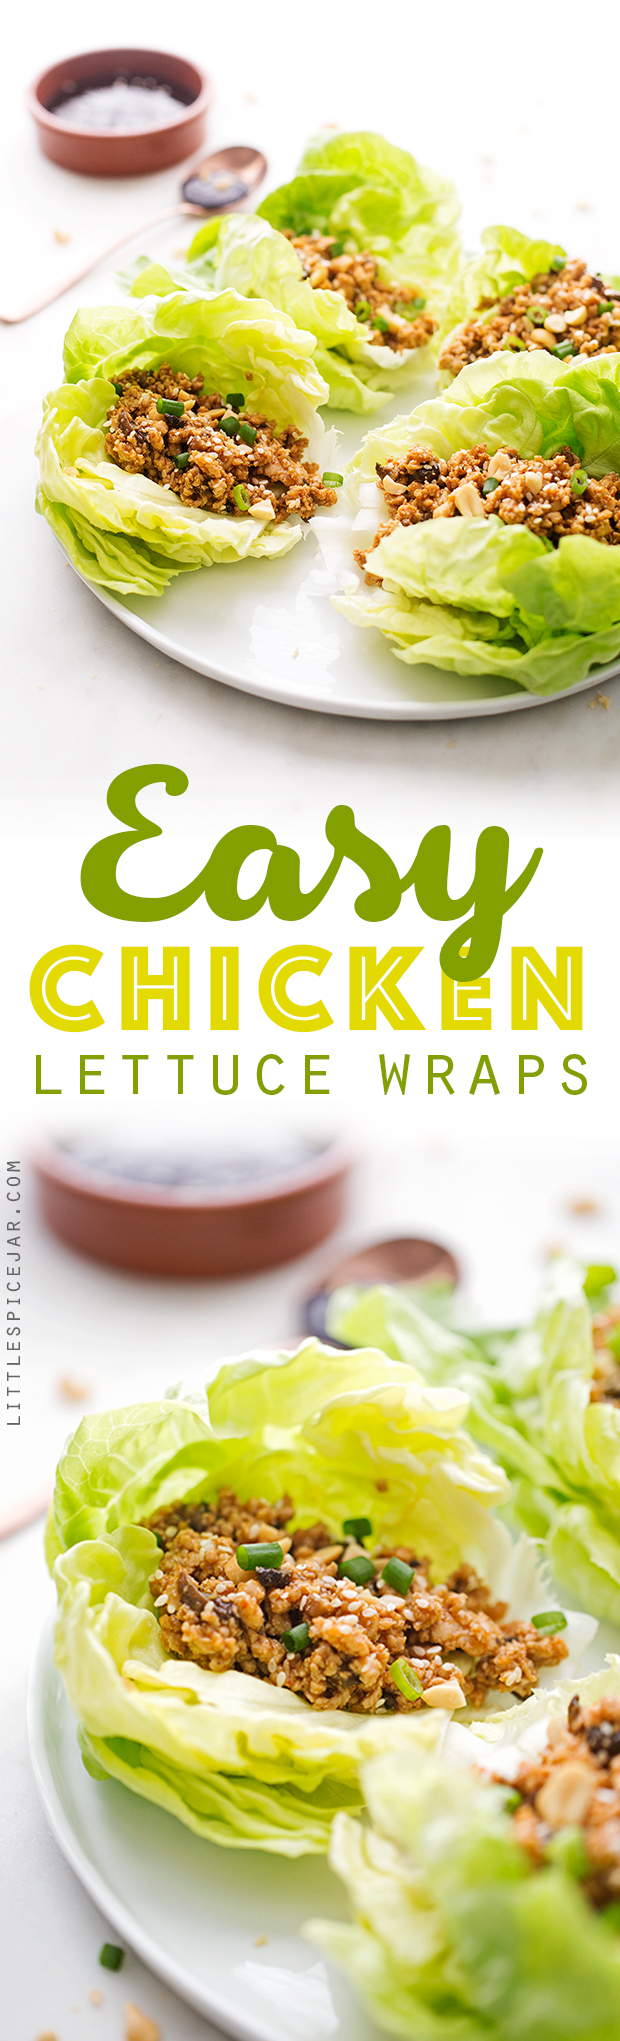 Easy Chicken Lettuce Wraps - Only 100 simple calories in this flavor loaded chicken lettuce wraps that are full of protein and perfect for light and healthy lunches and dinners! #chickenlettucewraps #asianchickenlettucewraps #lettucewraps | Littlespicejar.com